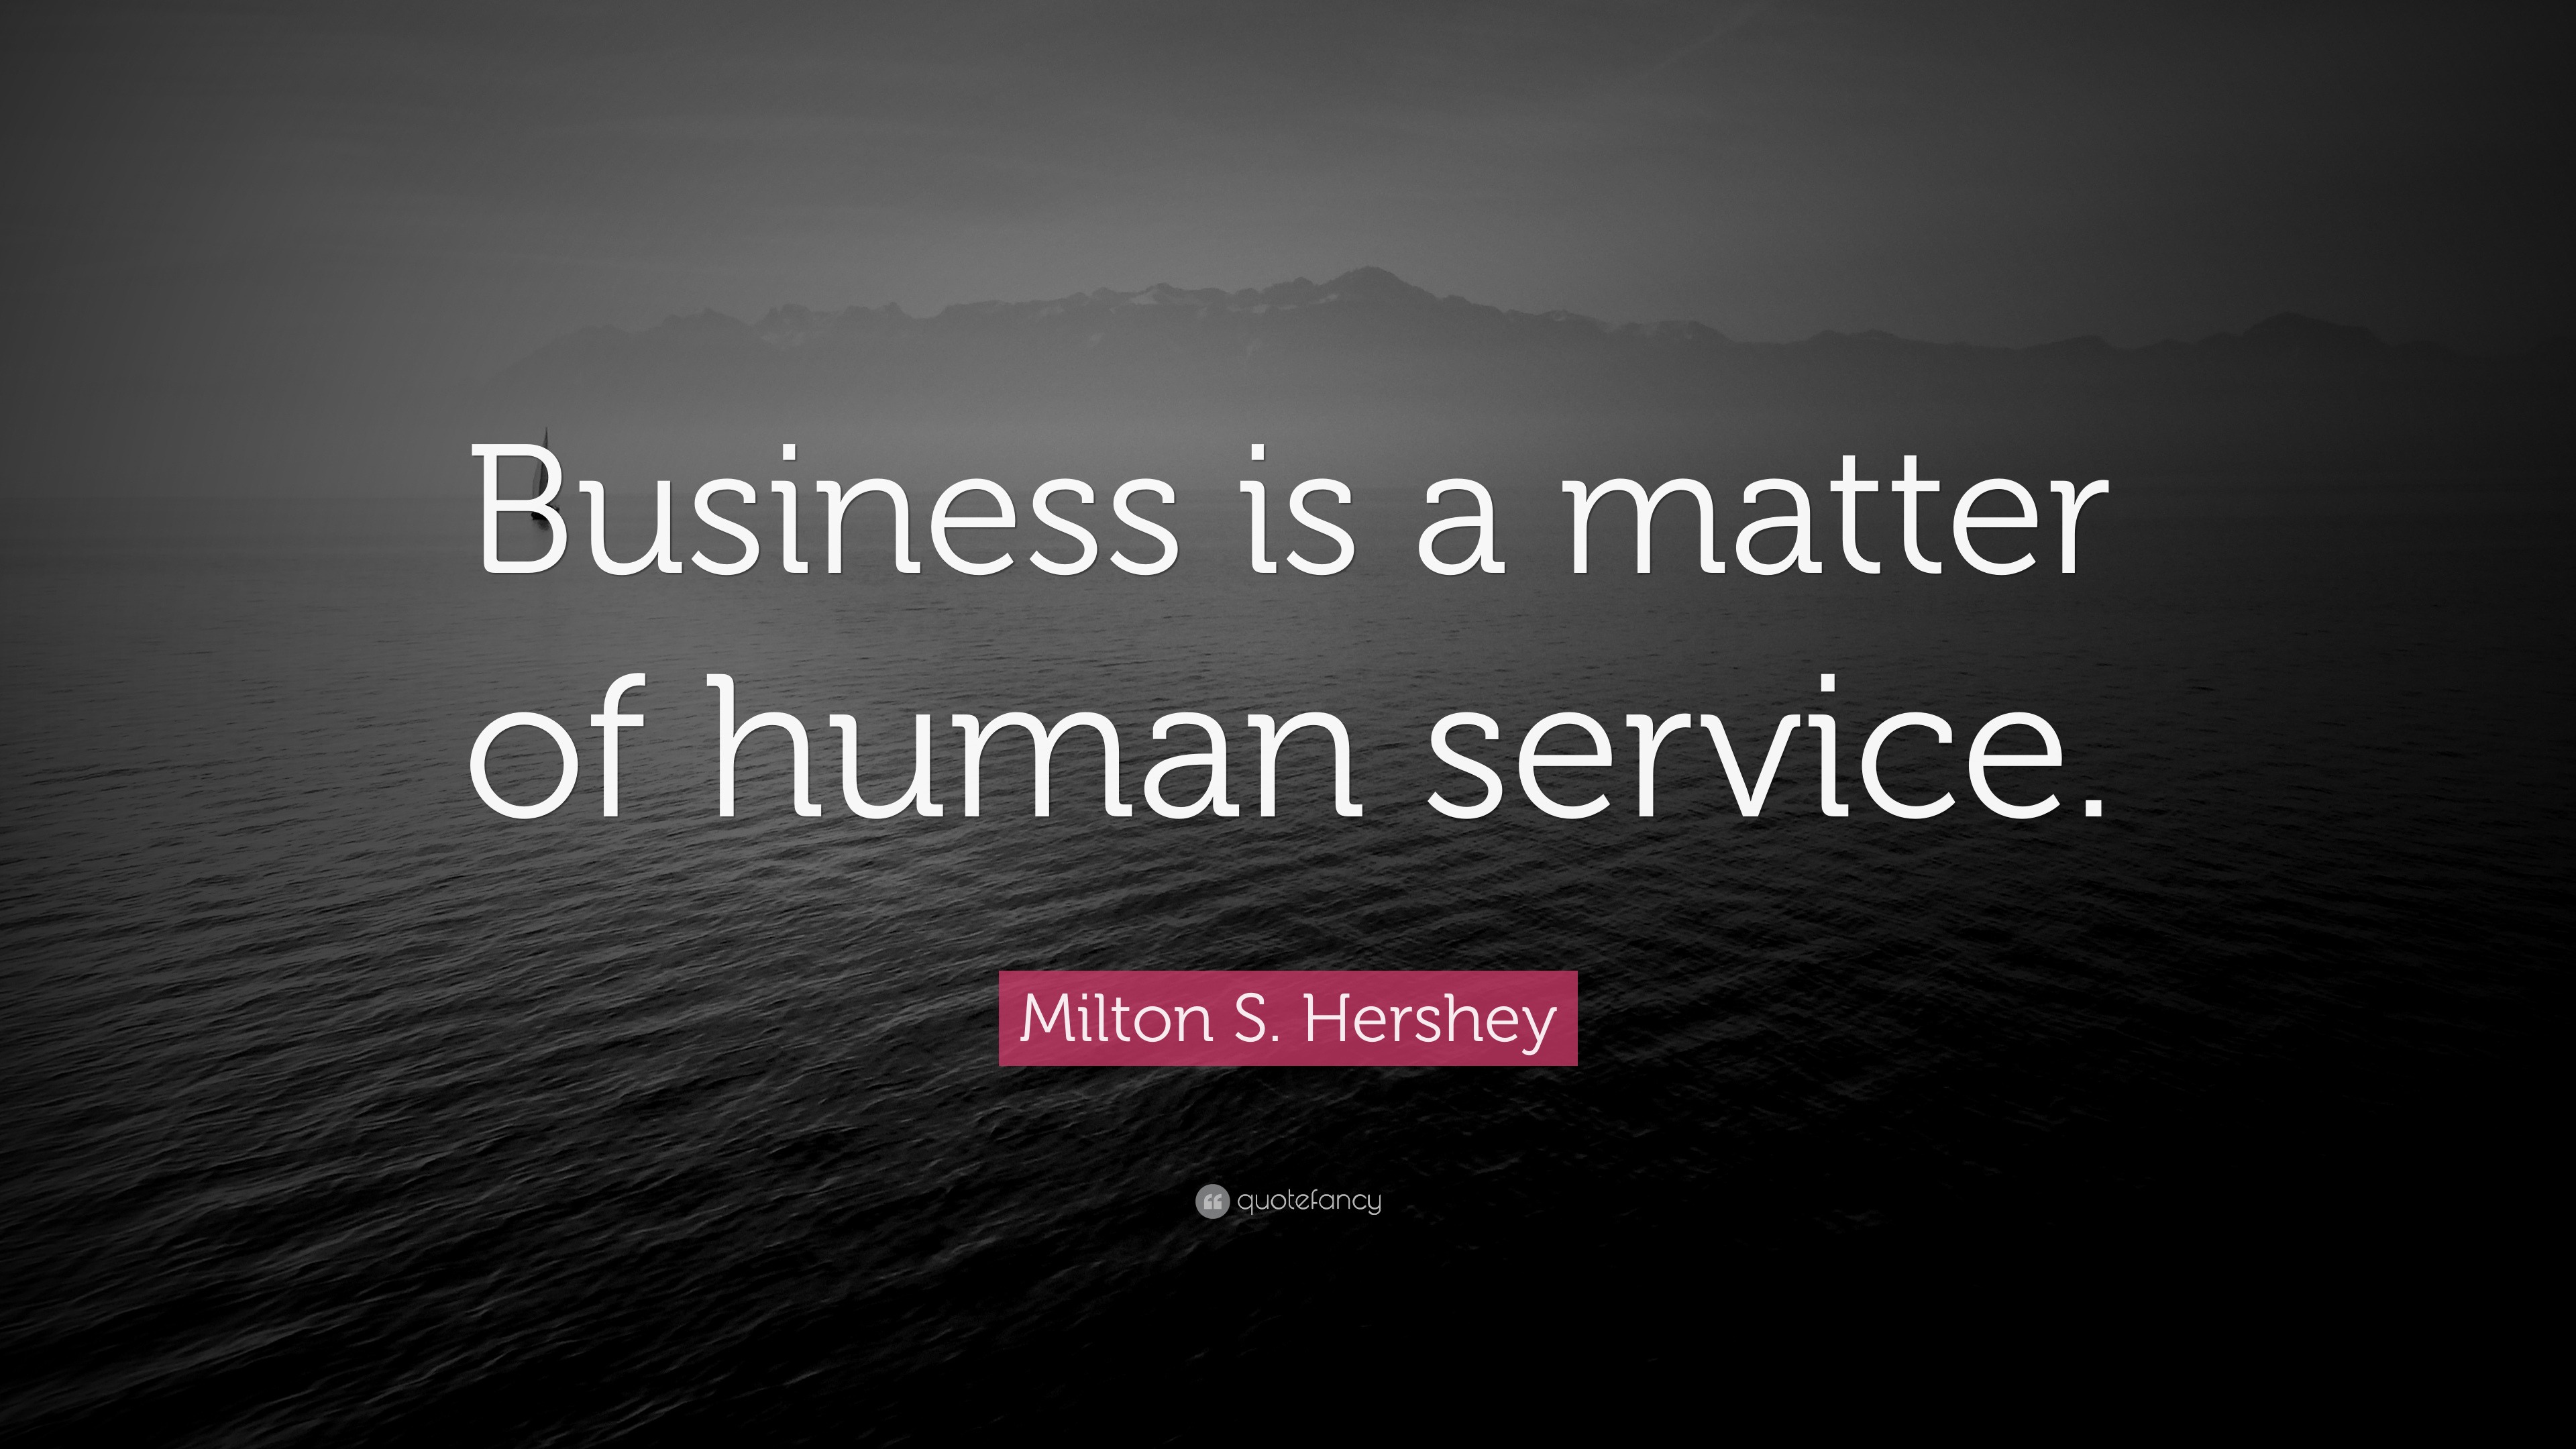 Milton S. Hershey Quote: “Business is a matter of human service.”